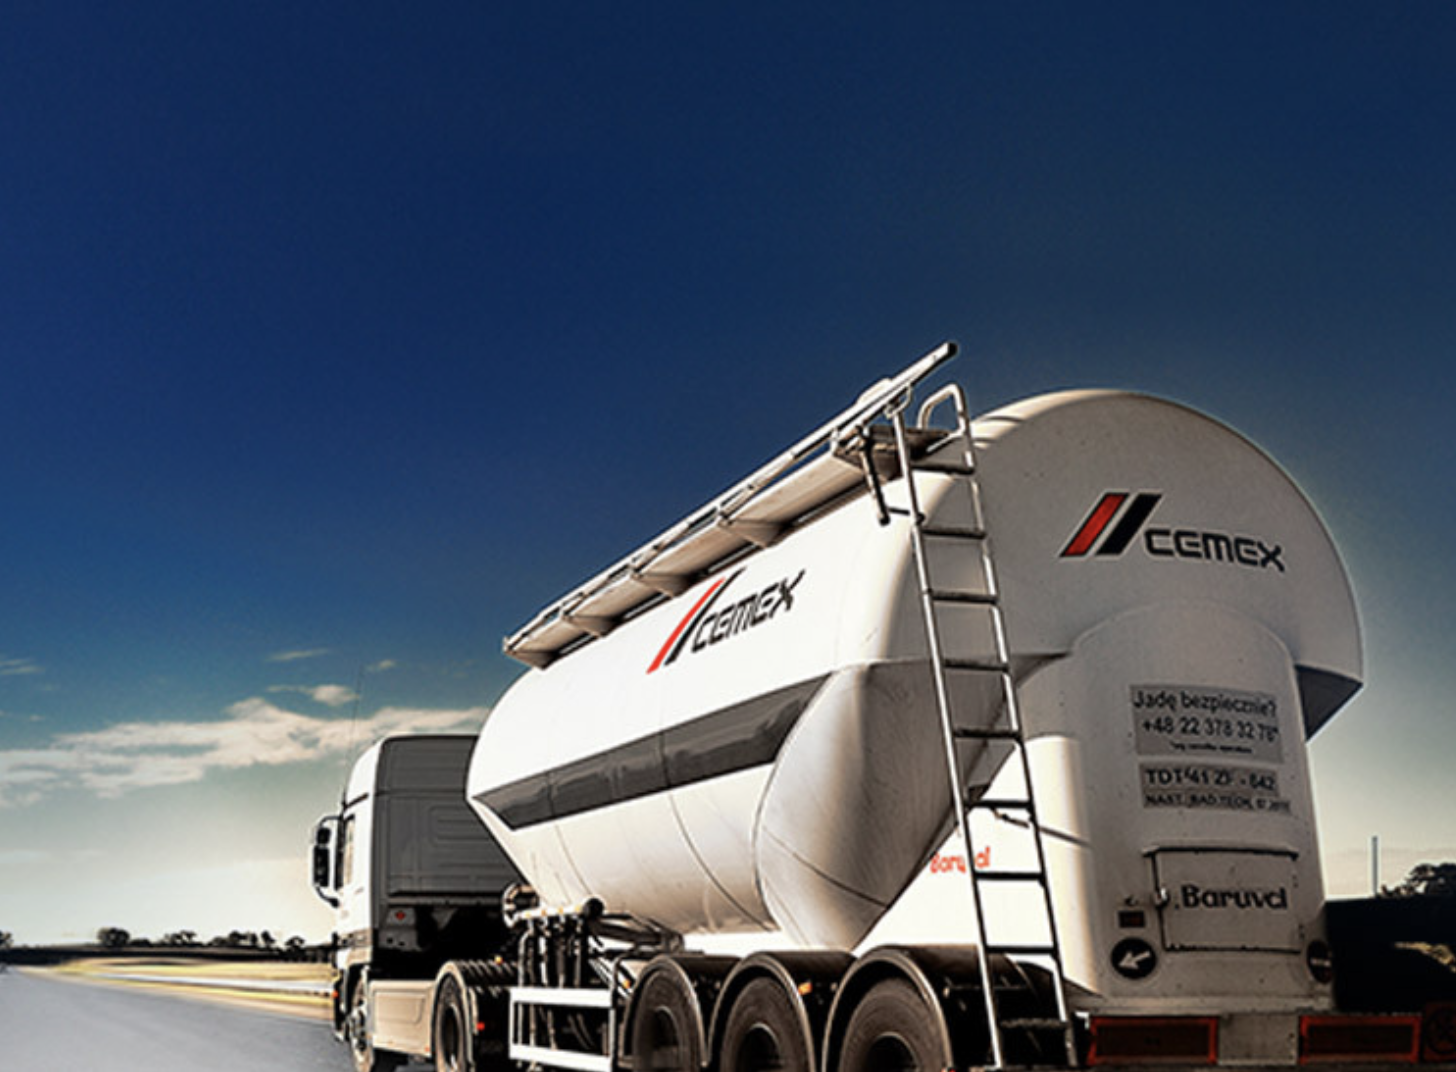 Cemex vision poster image